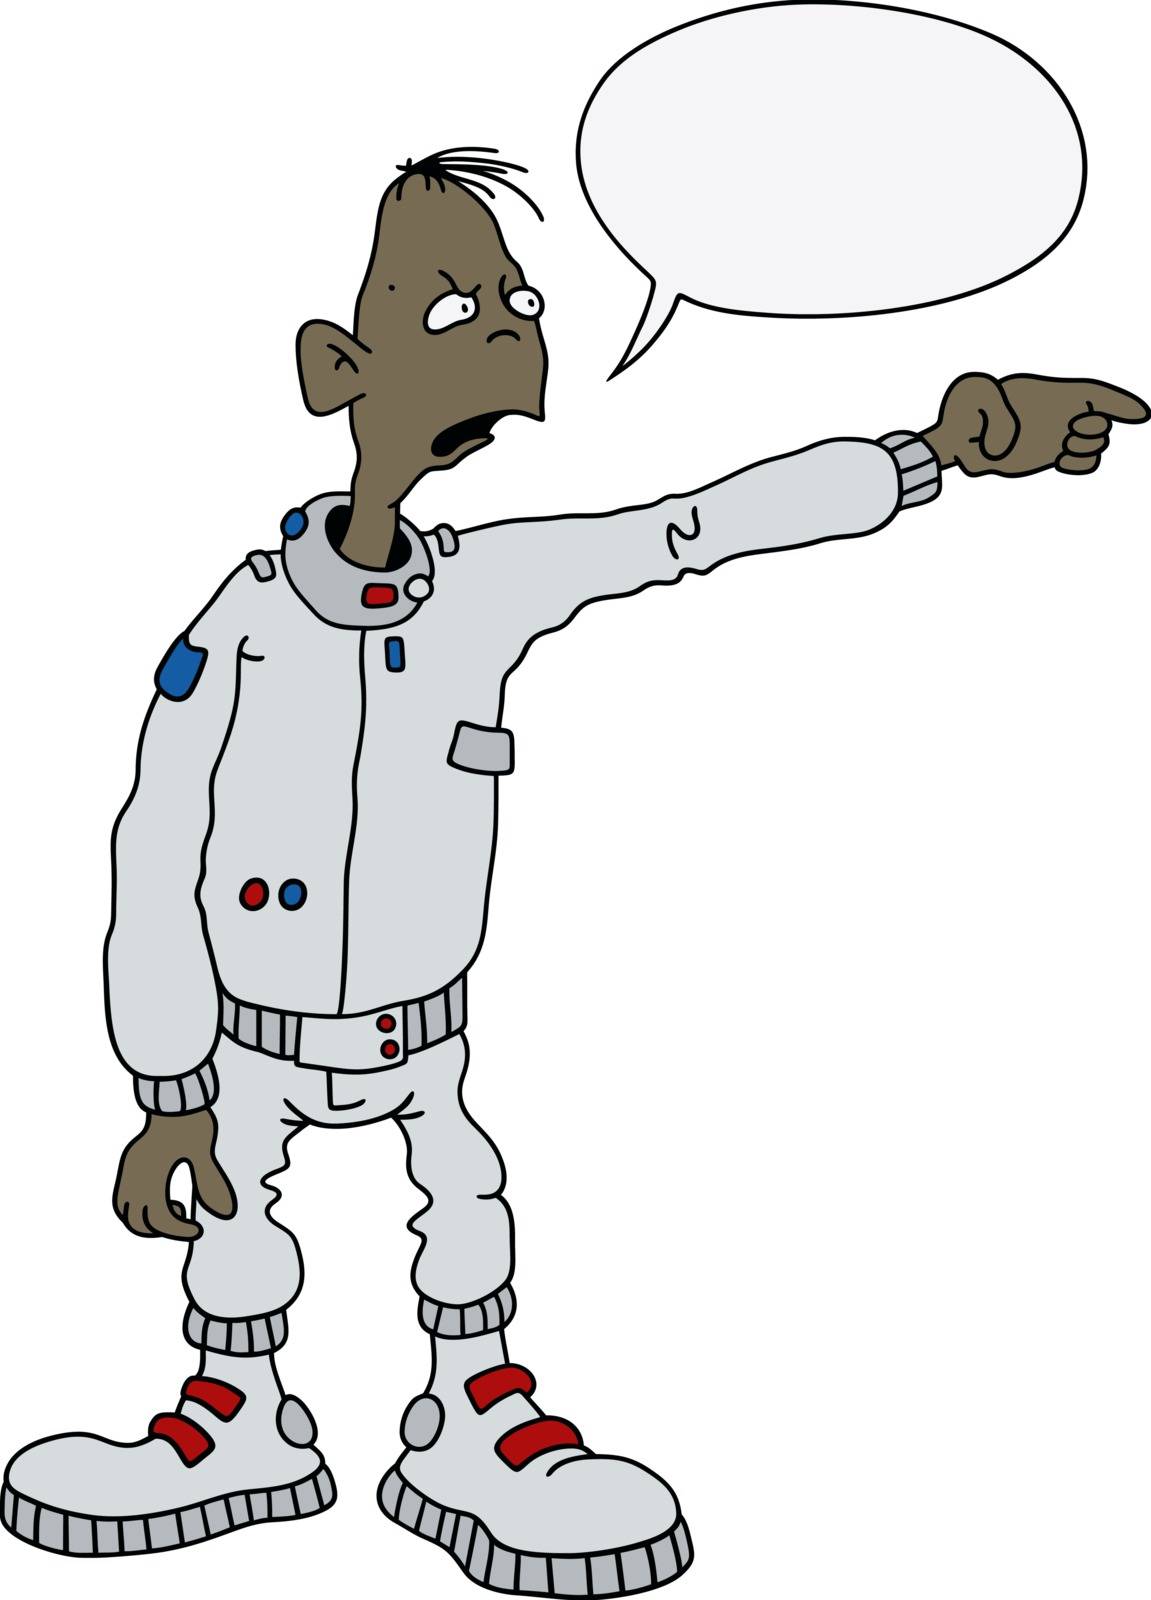 The hand drawing of a funny astronaut in a white armour